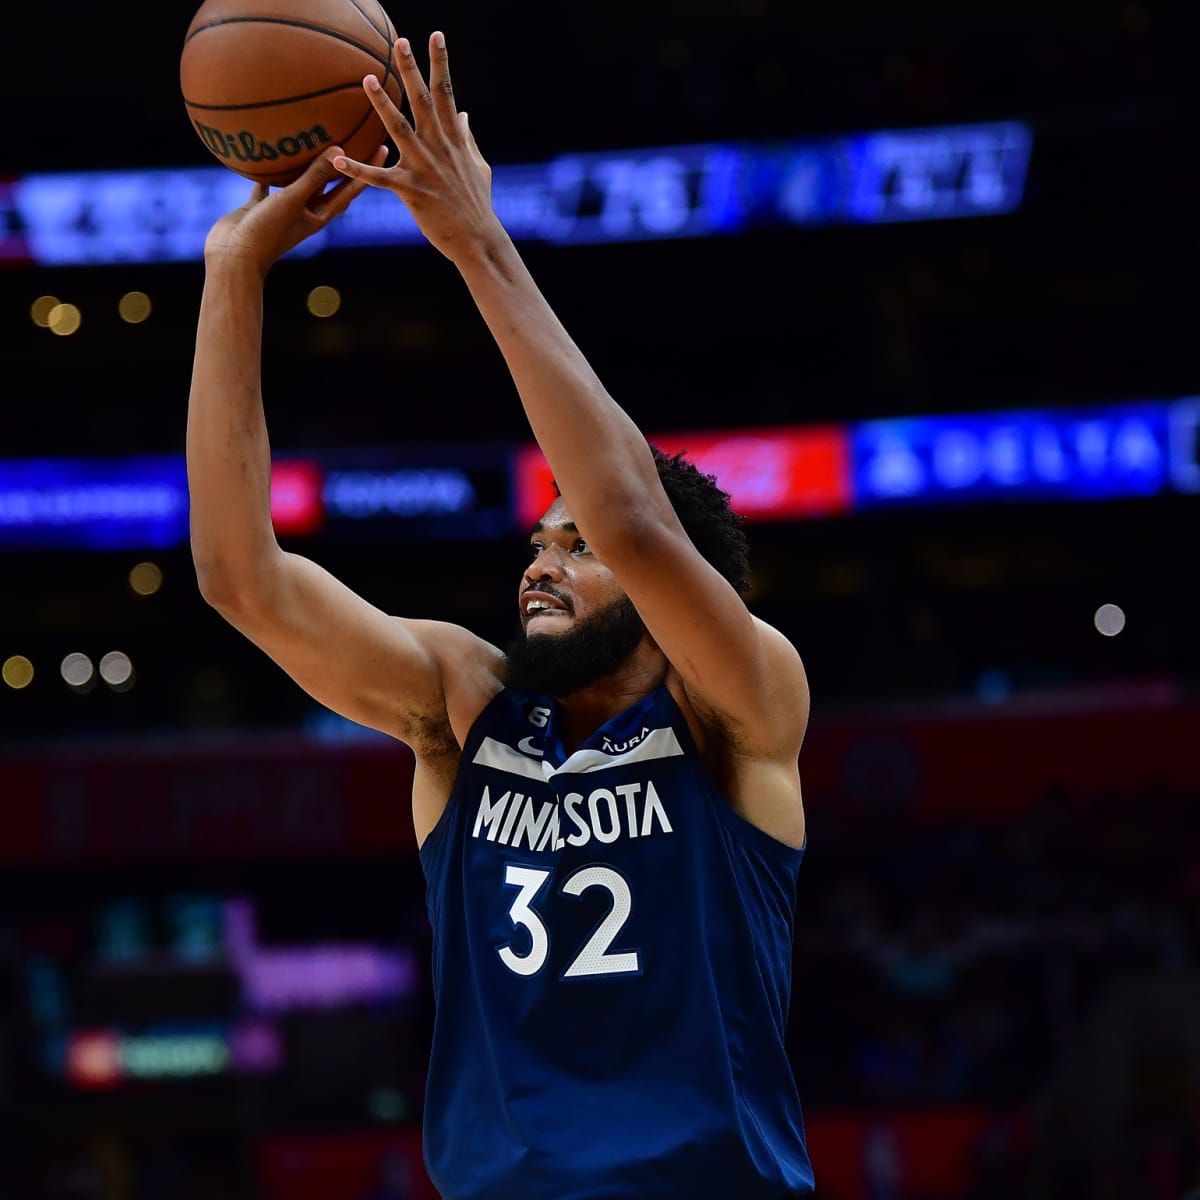 Karl-Anthony Towns erupts for emotional 27 points as Wolves defeat